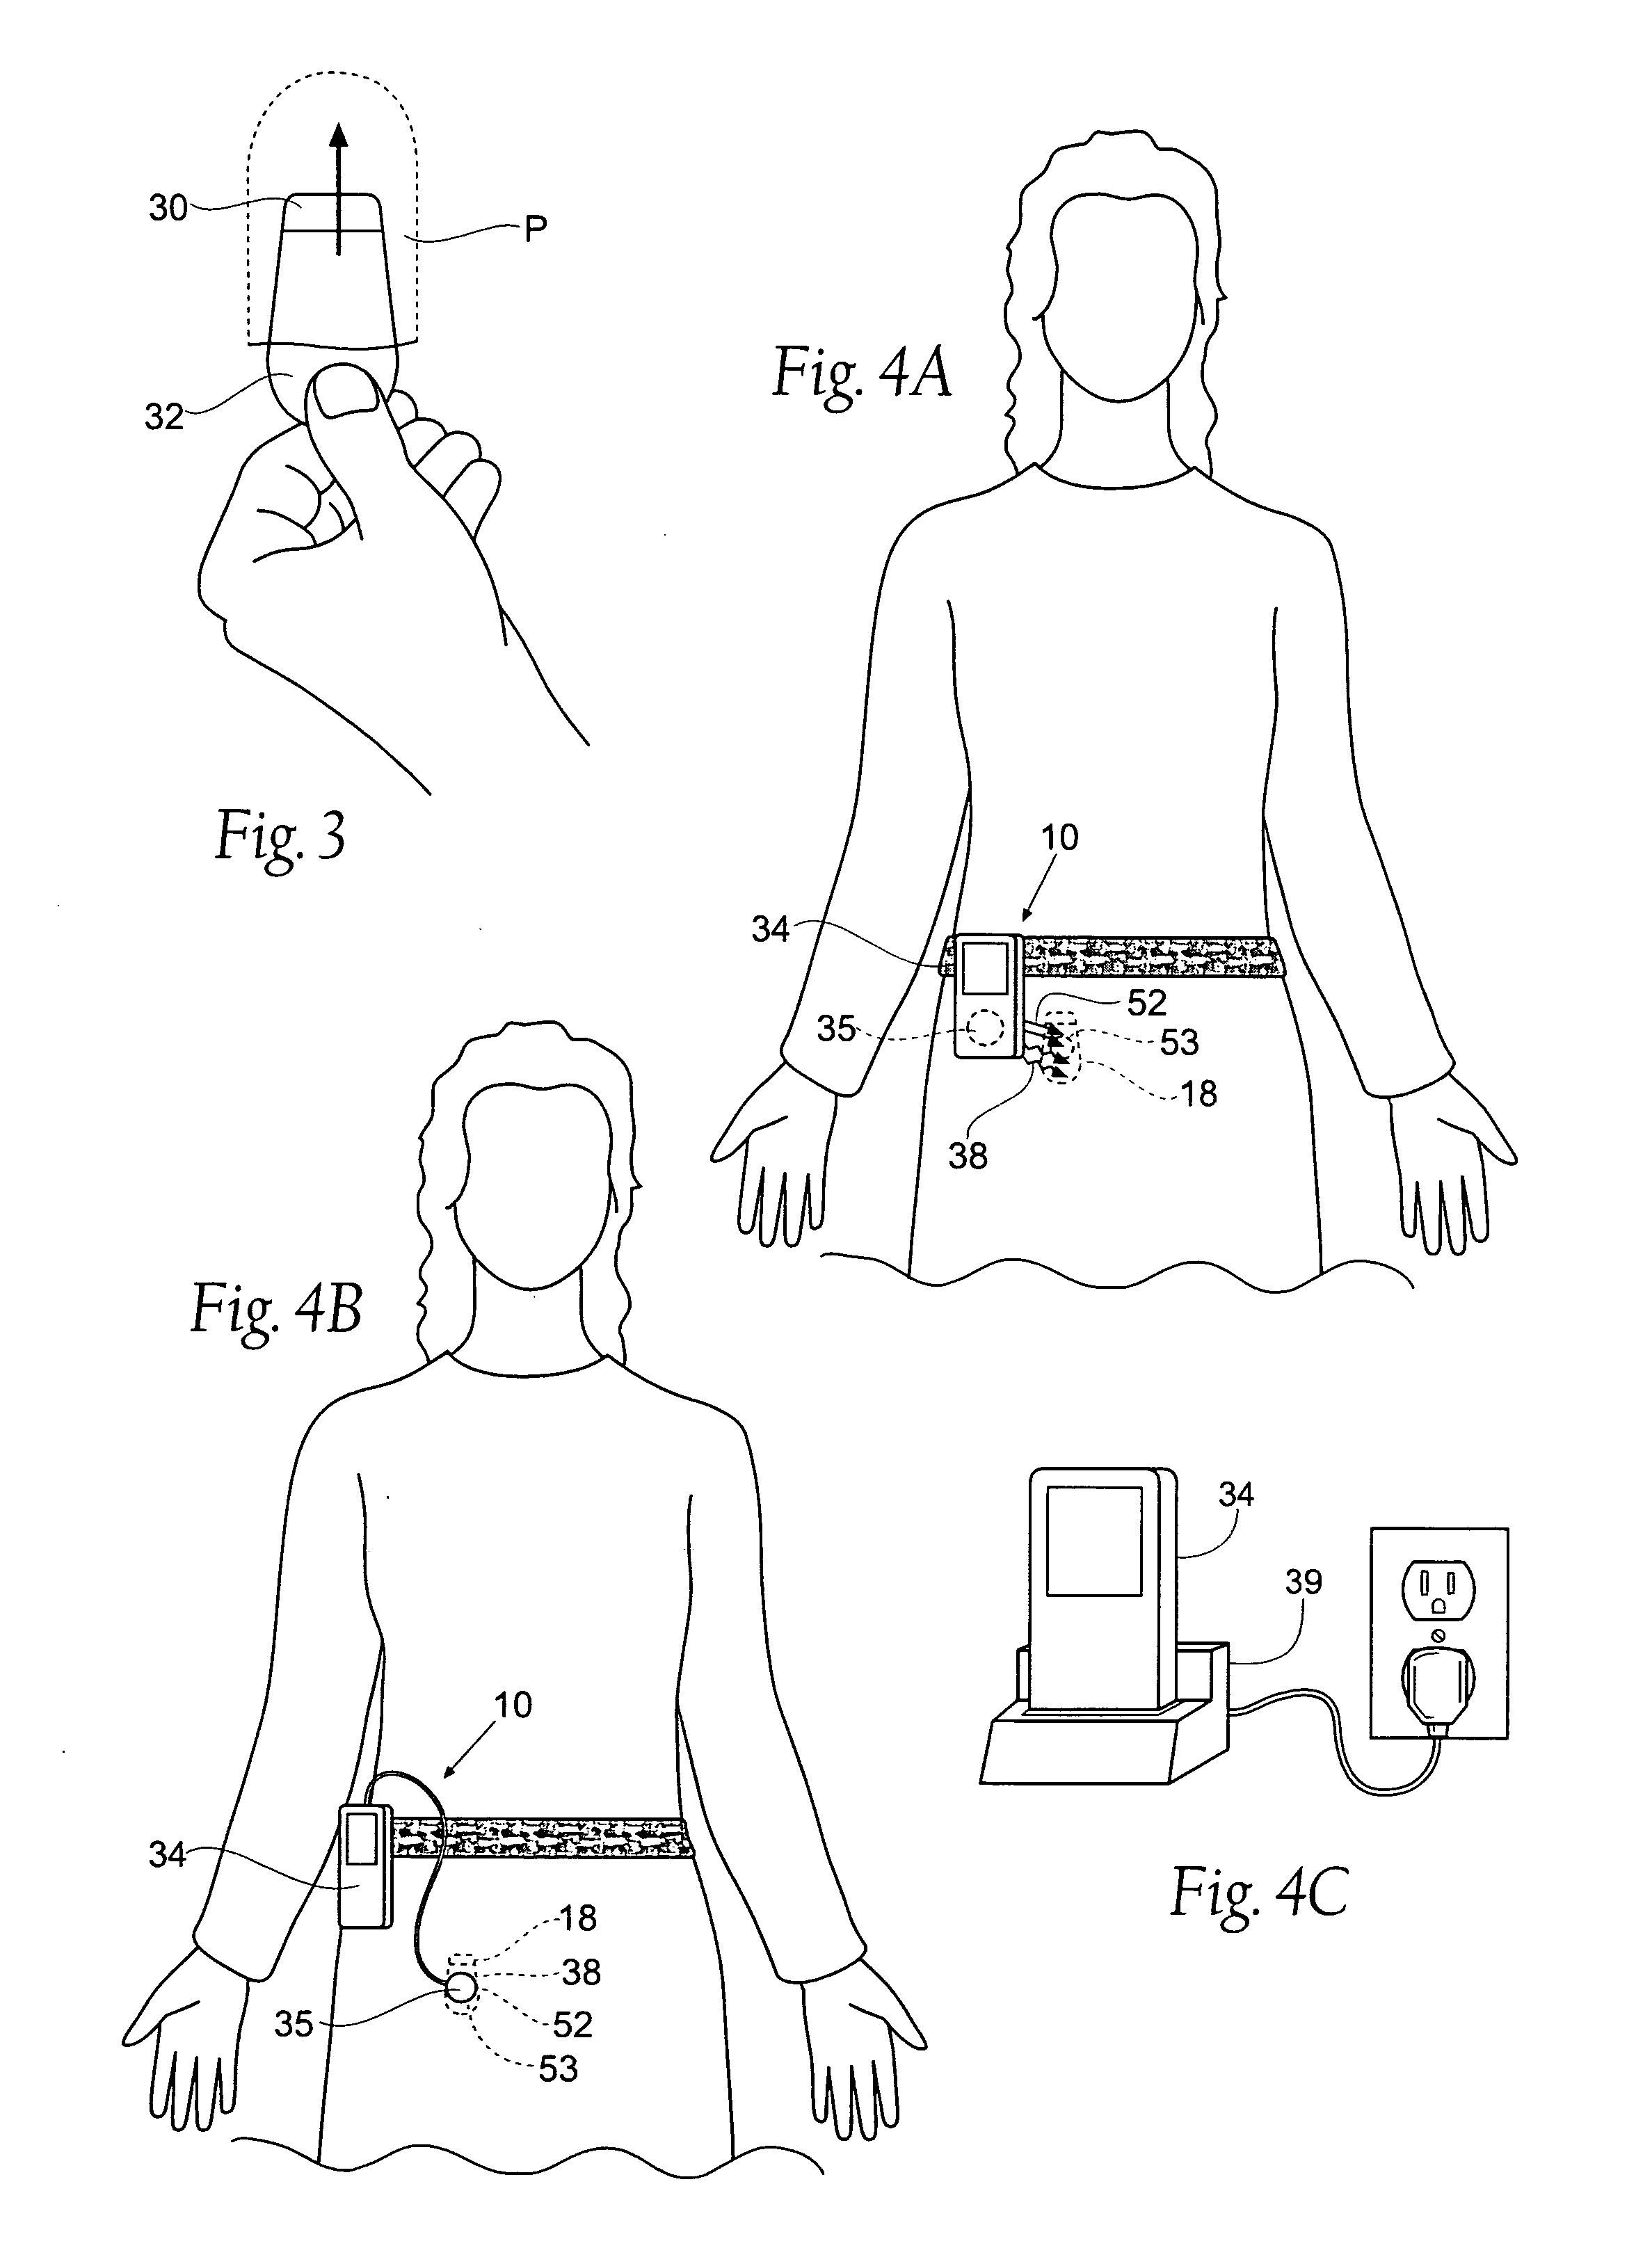 Implantable pulse generator for providing functional and/or therapeutic stimulation of muscles and /or nerves and/or central nervous system tissue